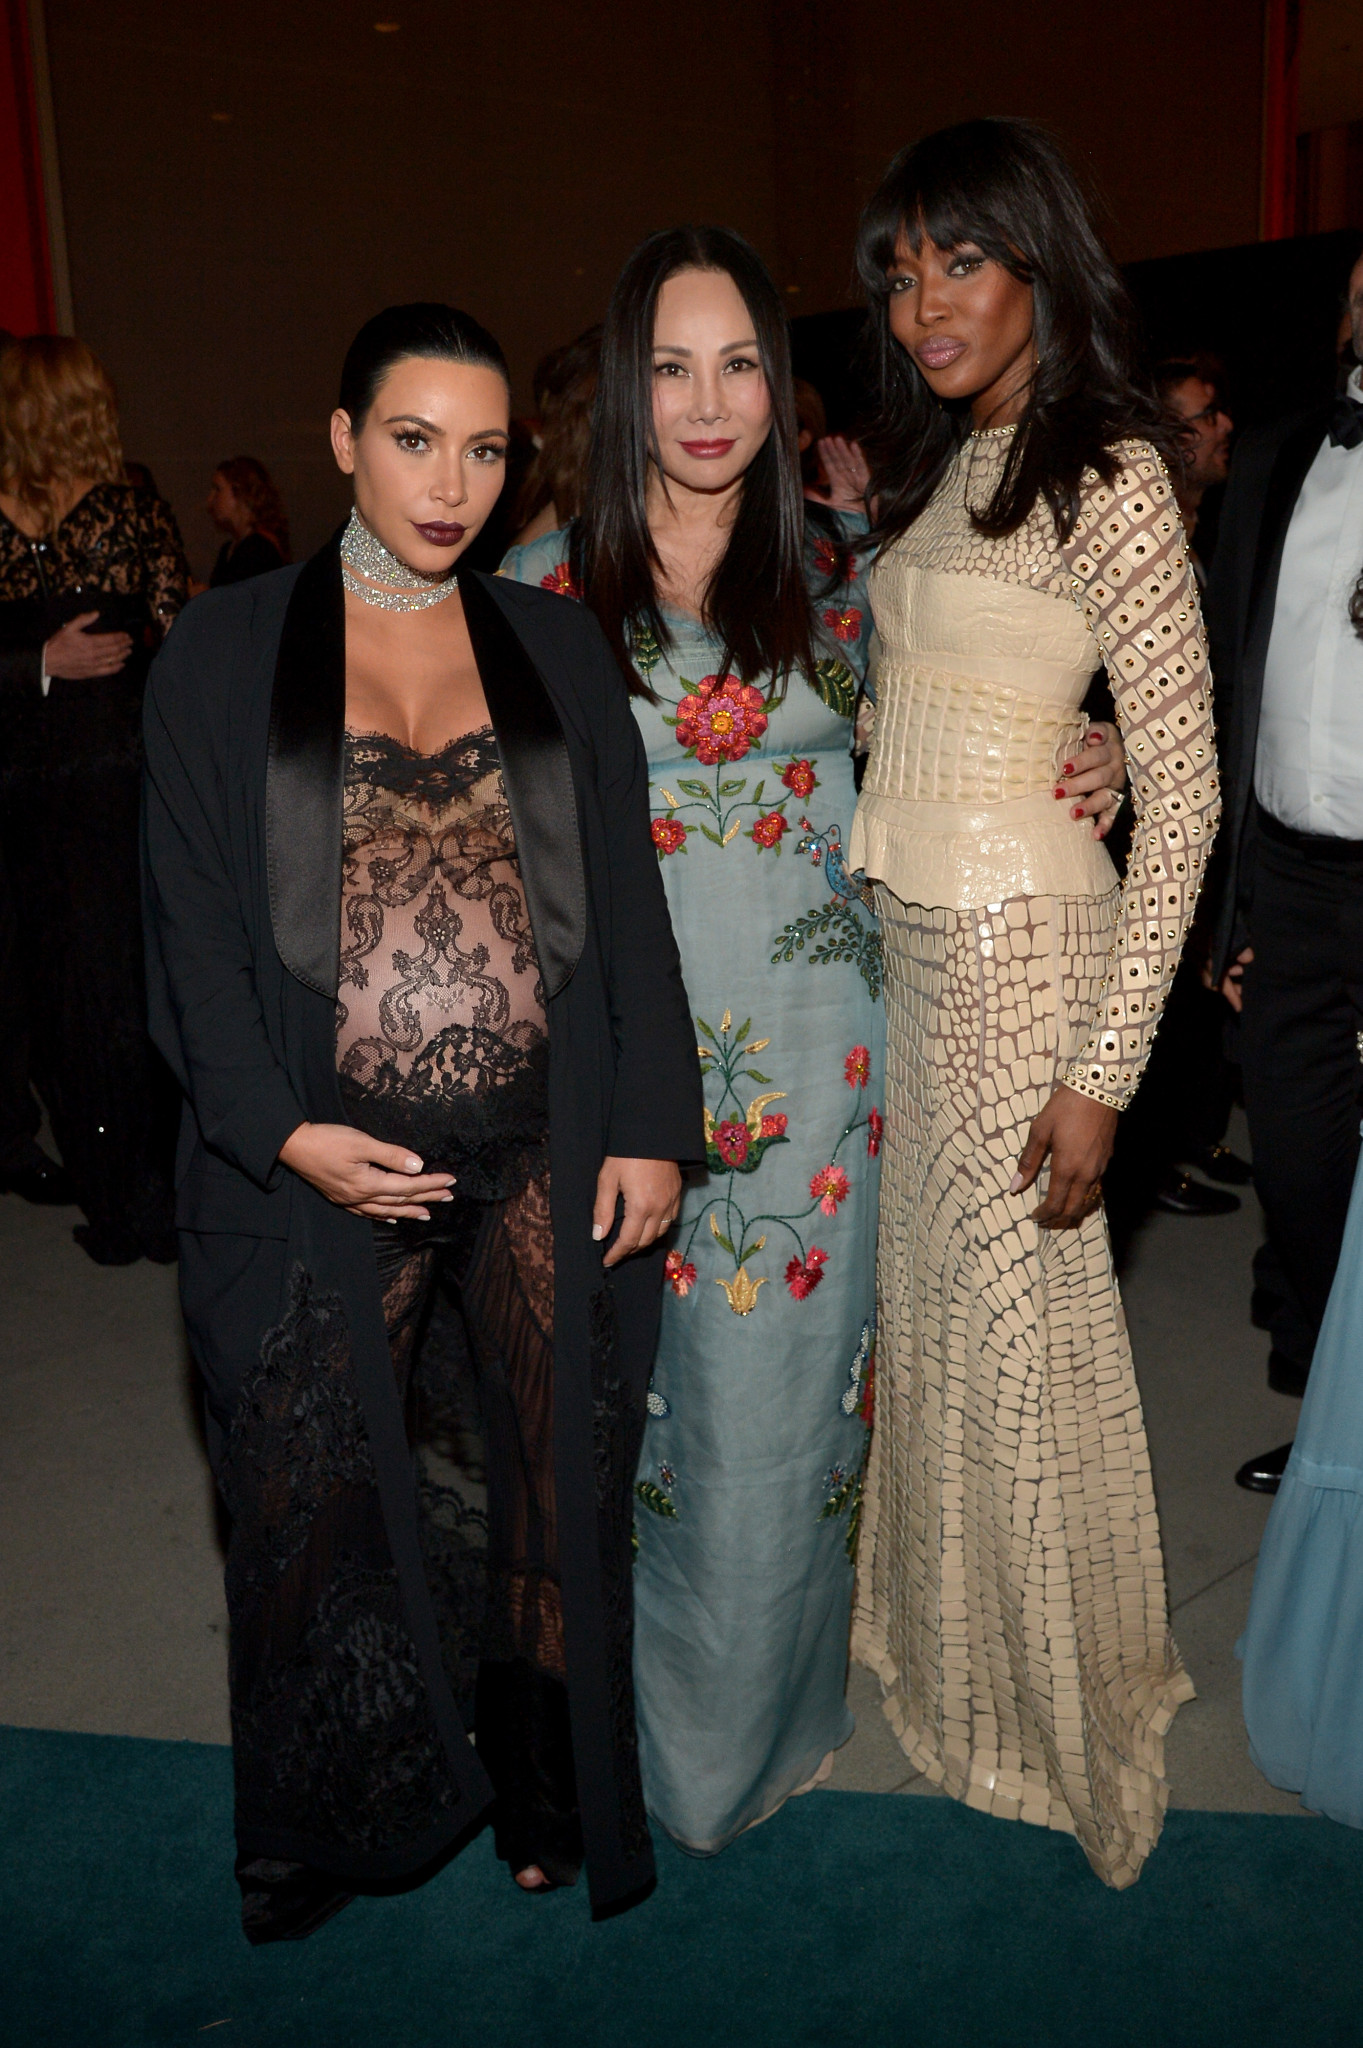 LOS ANGELES, CA - NOVEMBER 07: (L-R) TV personality Kim Kardashian West, LACMA trustee Eva Chow and model Naomi Campbell attend LACMA 2015 Art+Film Gala Honoring James Turrell and Alejandro G Iñárritu, Presented by Gucci at LACMA on November 7, 2015 in Los Angeles, California.  (Photo by Charley Gallay/Getty Images for LACMA) 